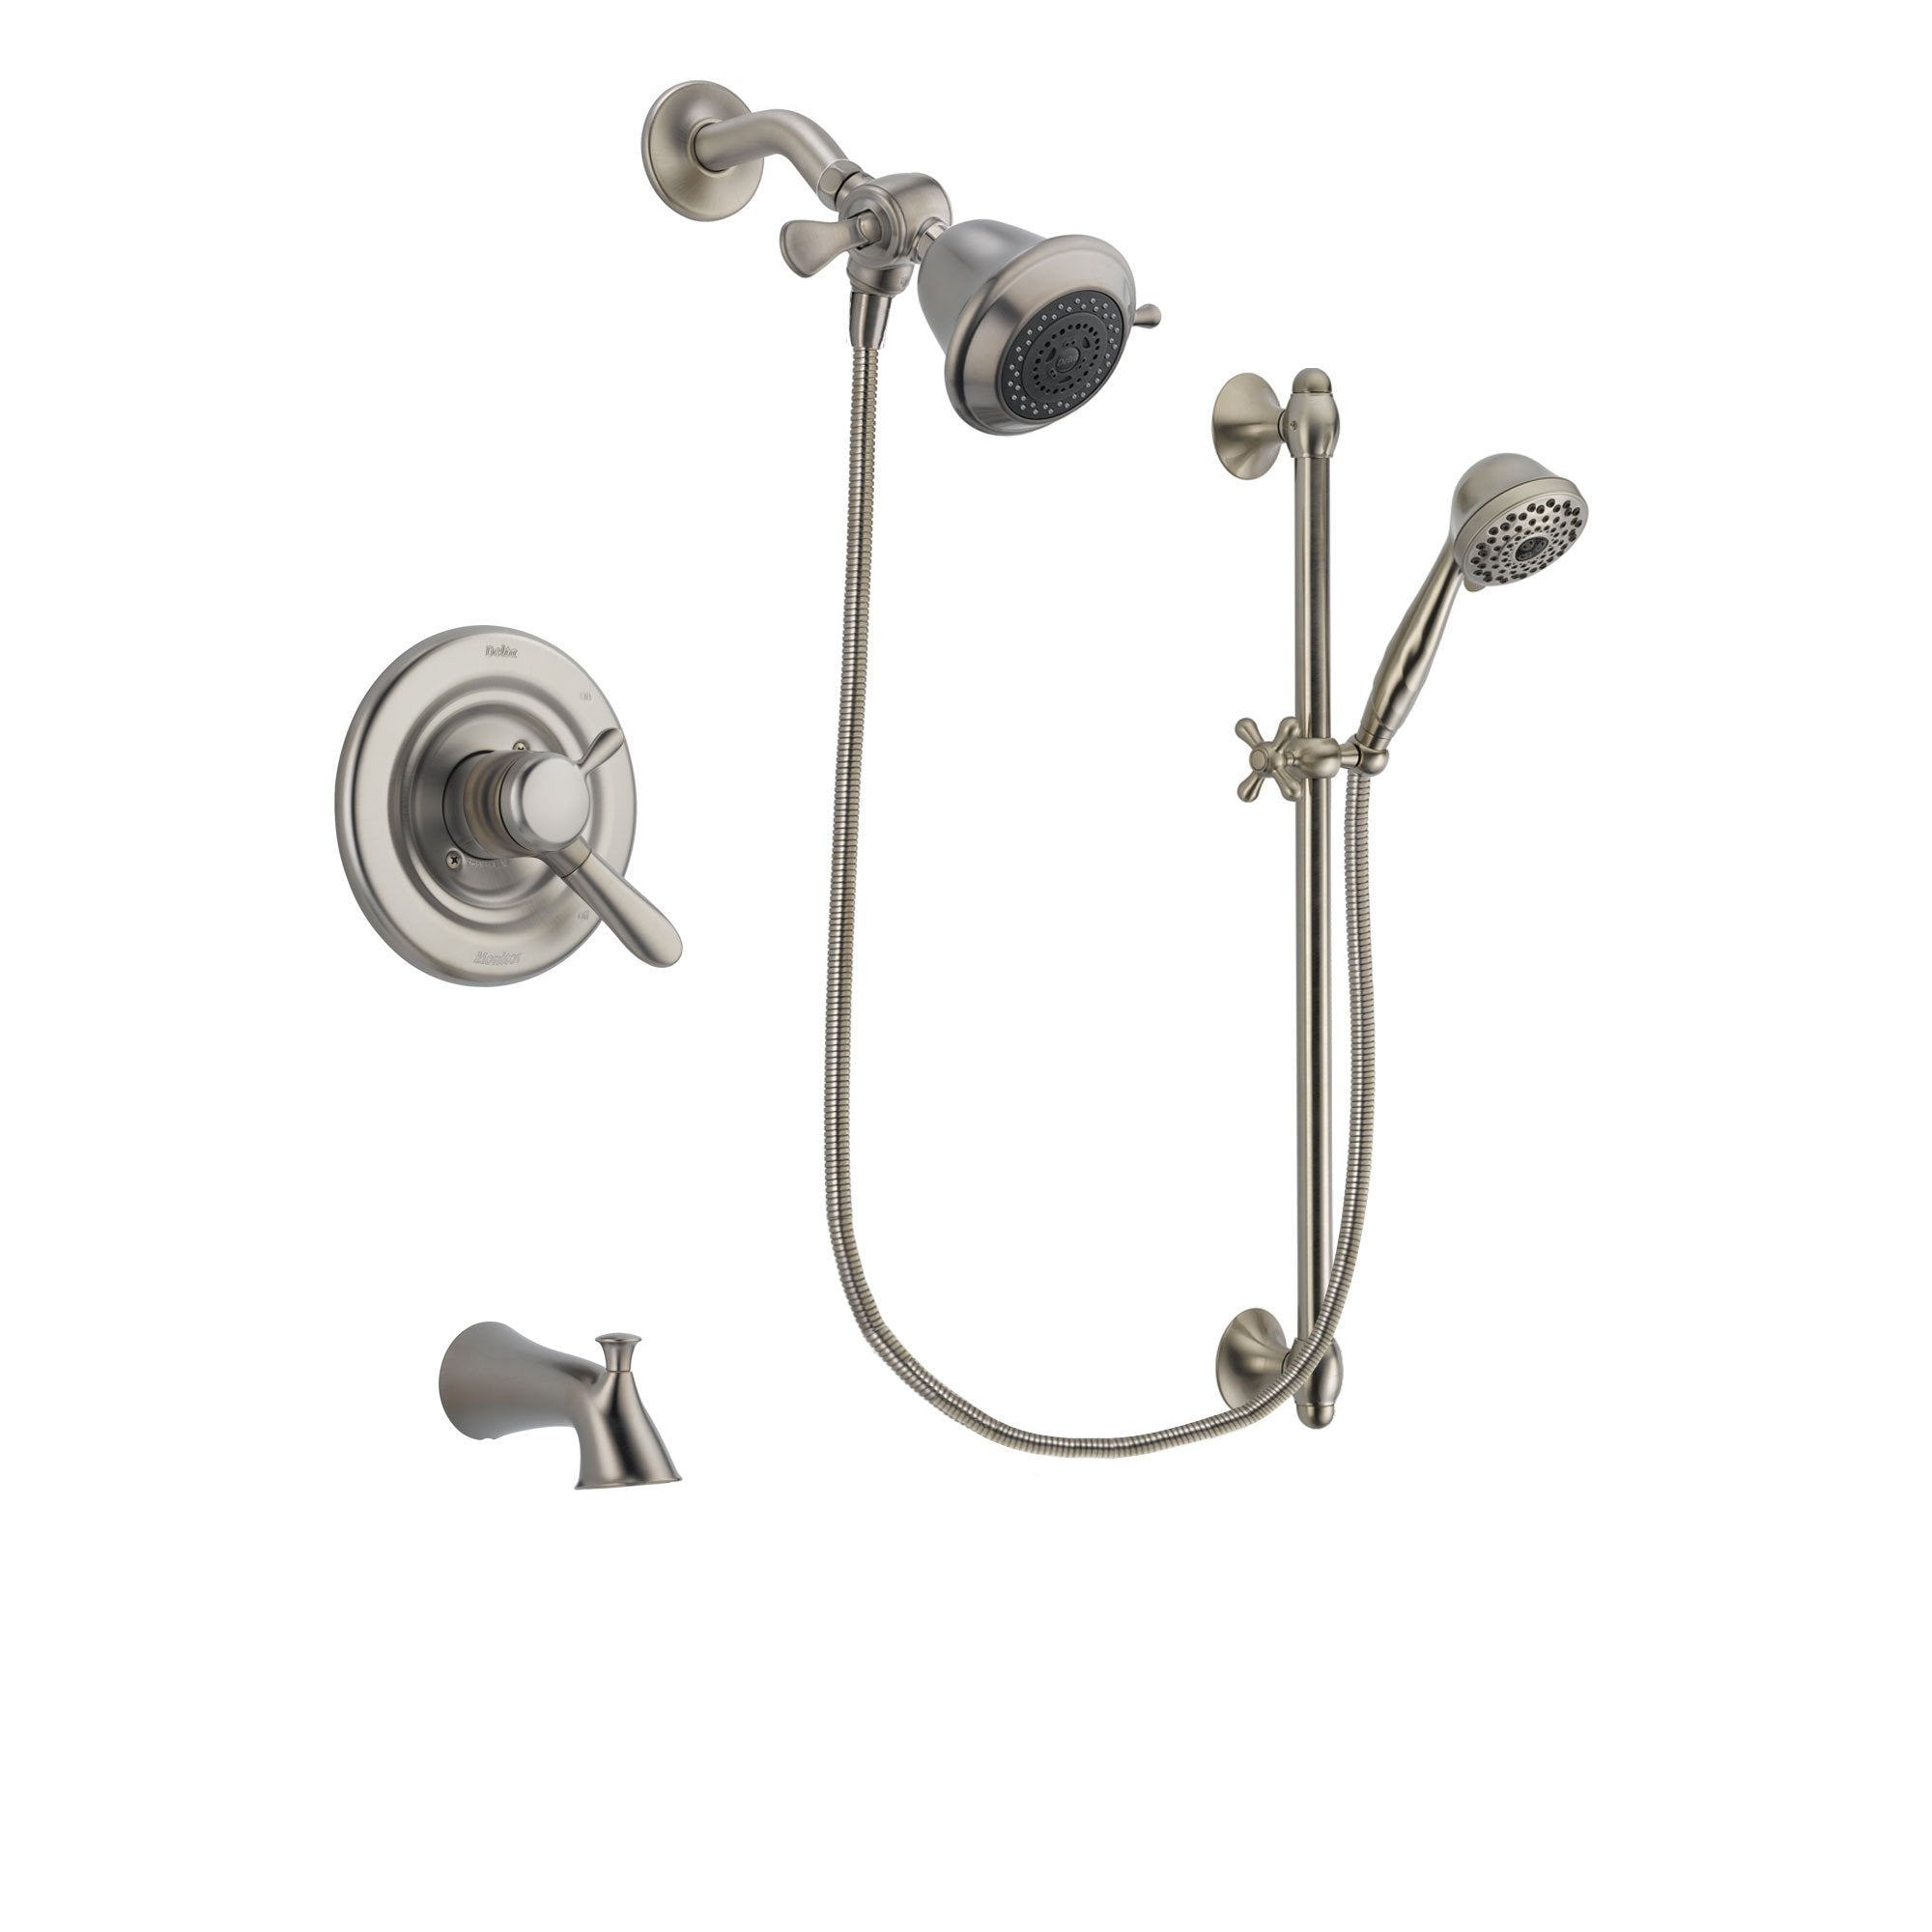 Delta Lahara Stainless Steel Finish Dual Control Tub and Shower Faucet System Package with Shower Head and 7-Spray Handheld Shower with Slide Bar Includes Rough-in Valve and Tub Spout DSP1669V